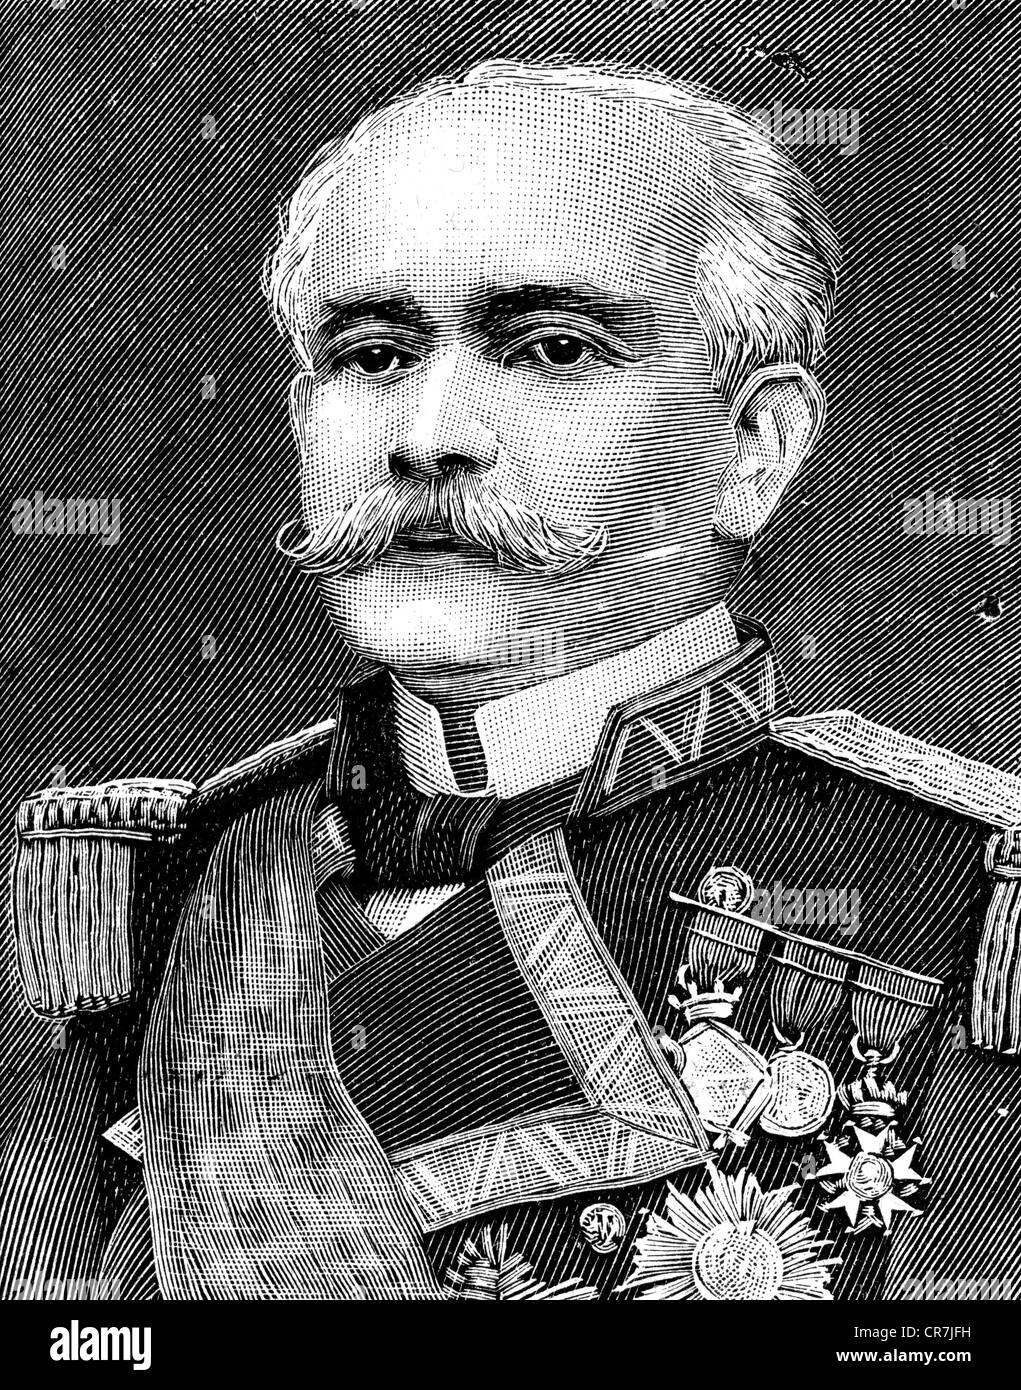 Montojo y Pasaron, Patricio, 7.9.1839 - 30.9.1917, Spanish admiral, commander of the Spanish naval forces on the Philippines 1897 - 1898, portrait, wood engraving, 1898, Stock Photo